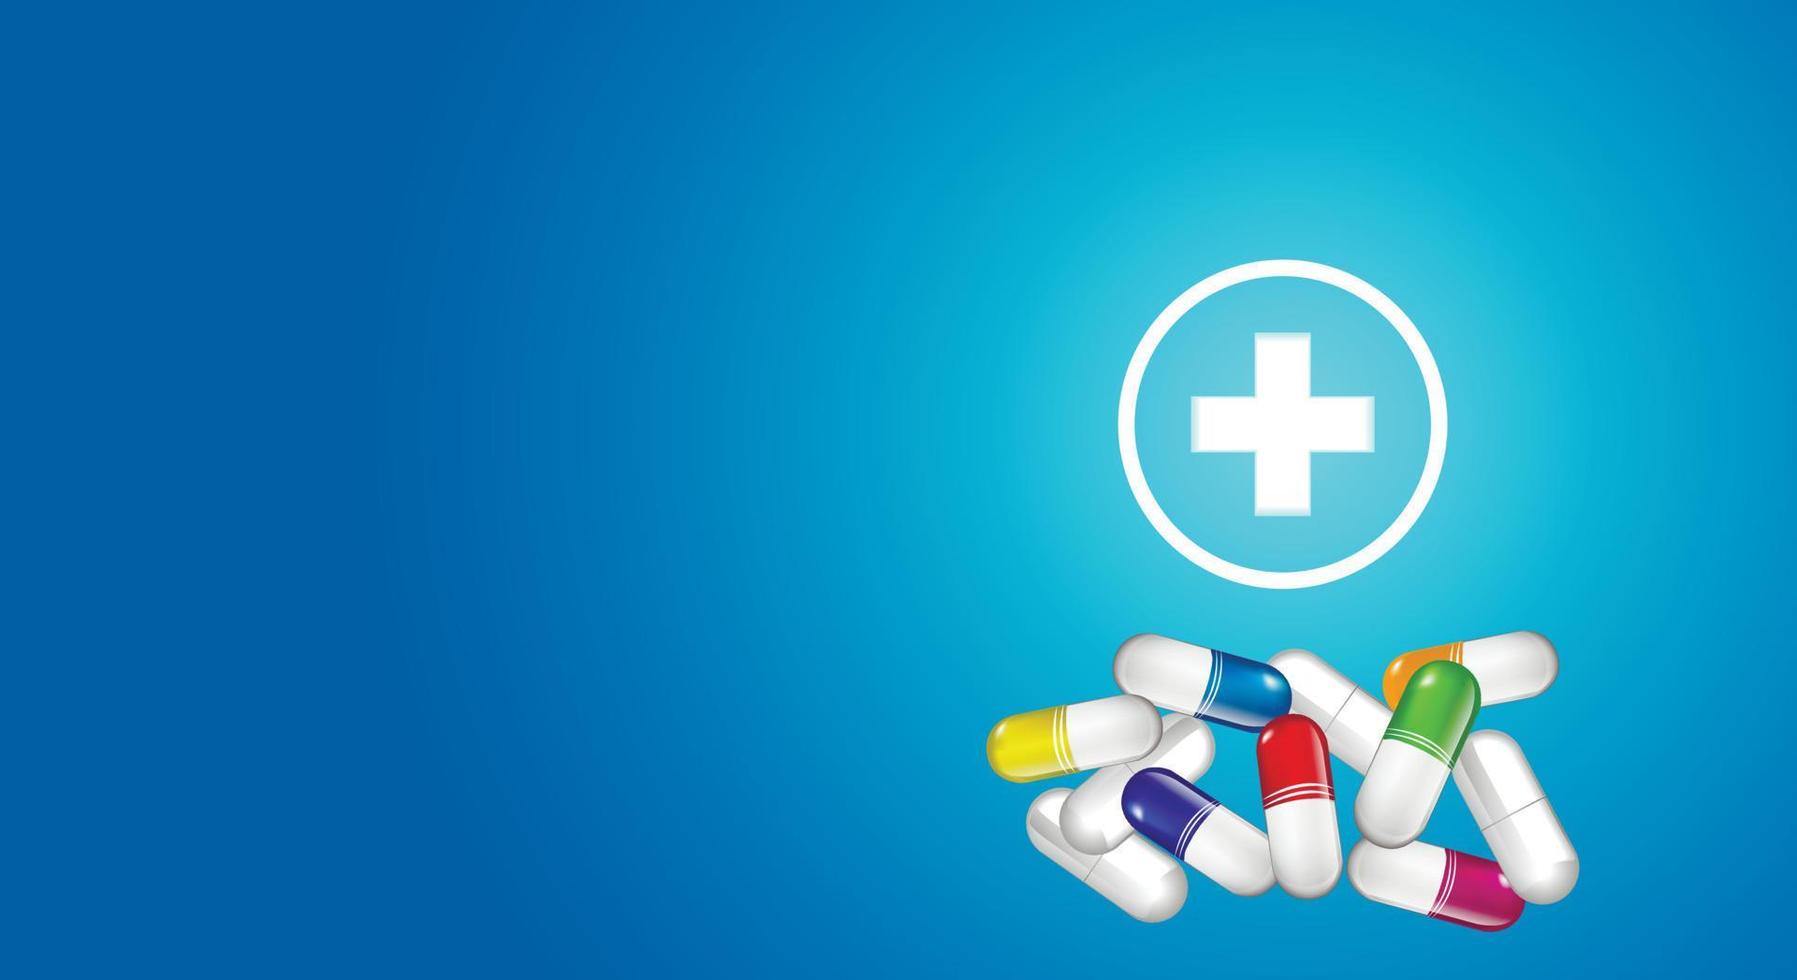 Colorful pills, capsules, glowing cross on a blue gradient background. Medicine health care symbols. Copy space. Vector illustration